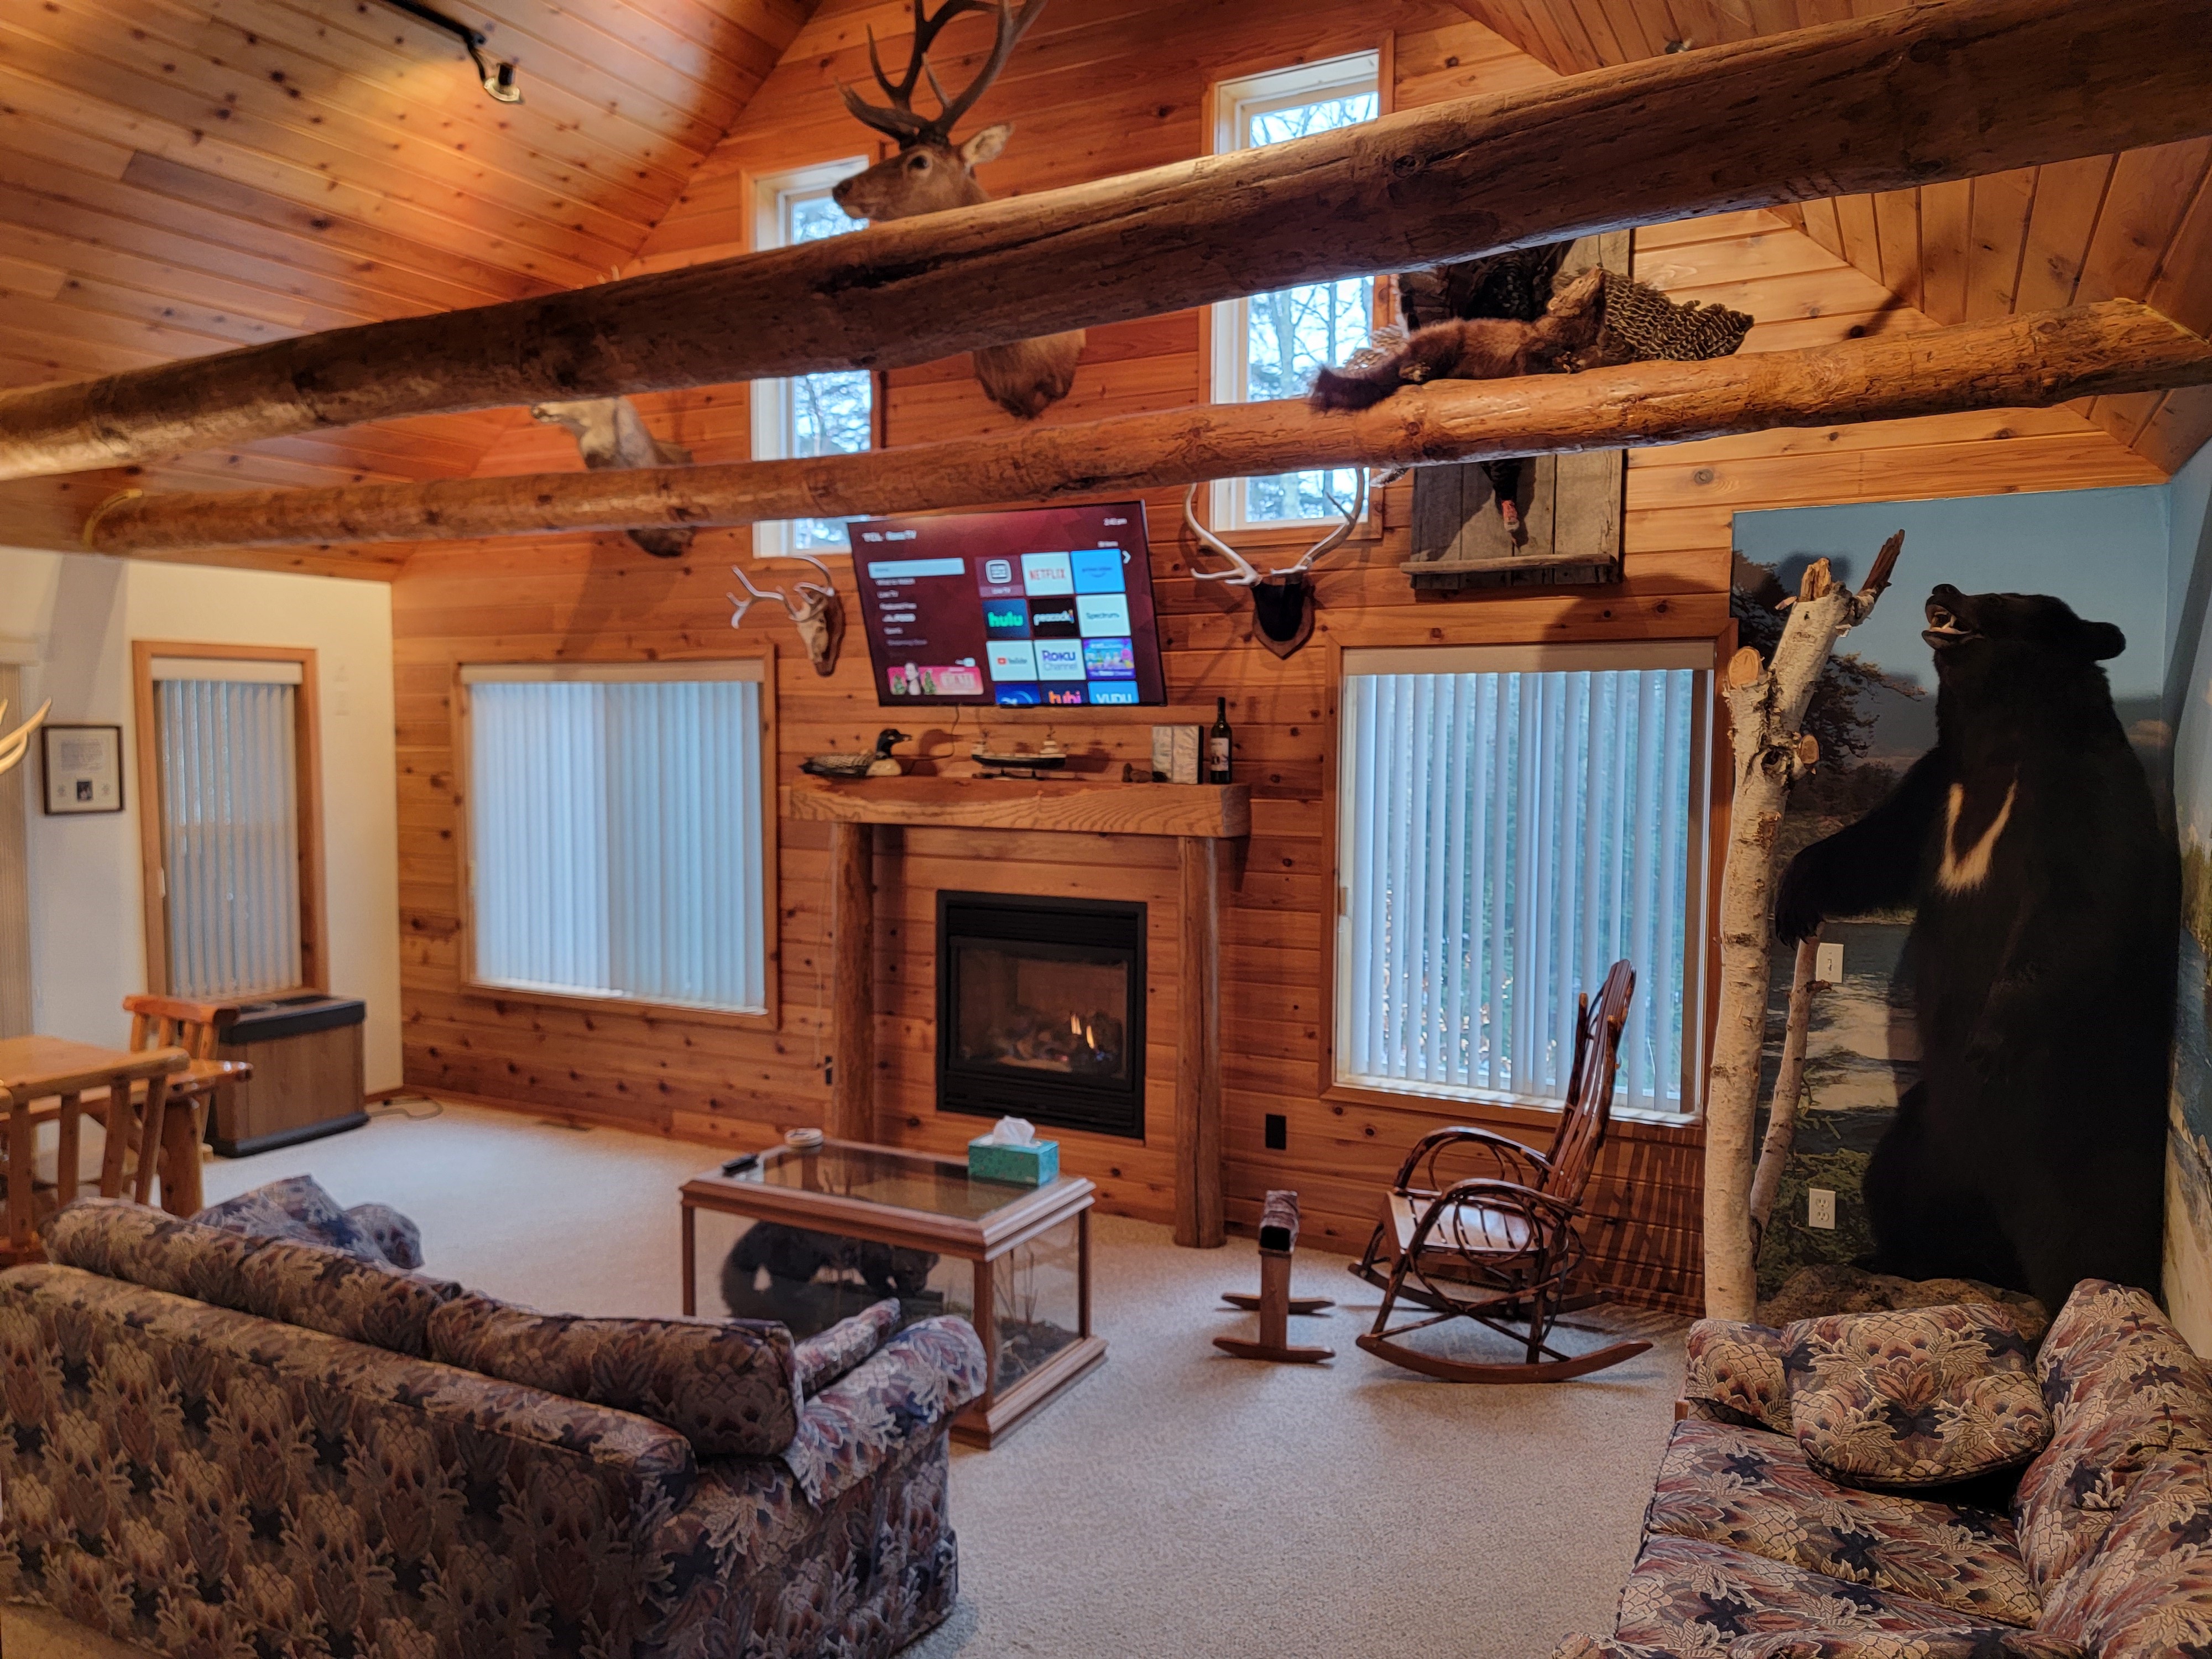 Upper Peninsula Cabin and Vacation Home Rental on Manistique River